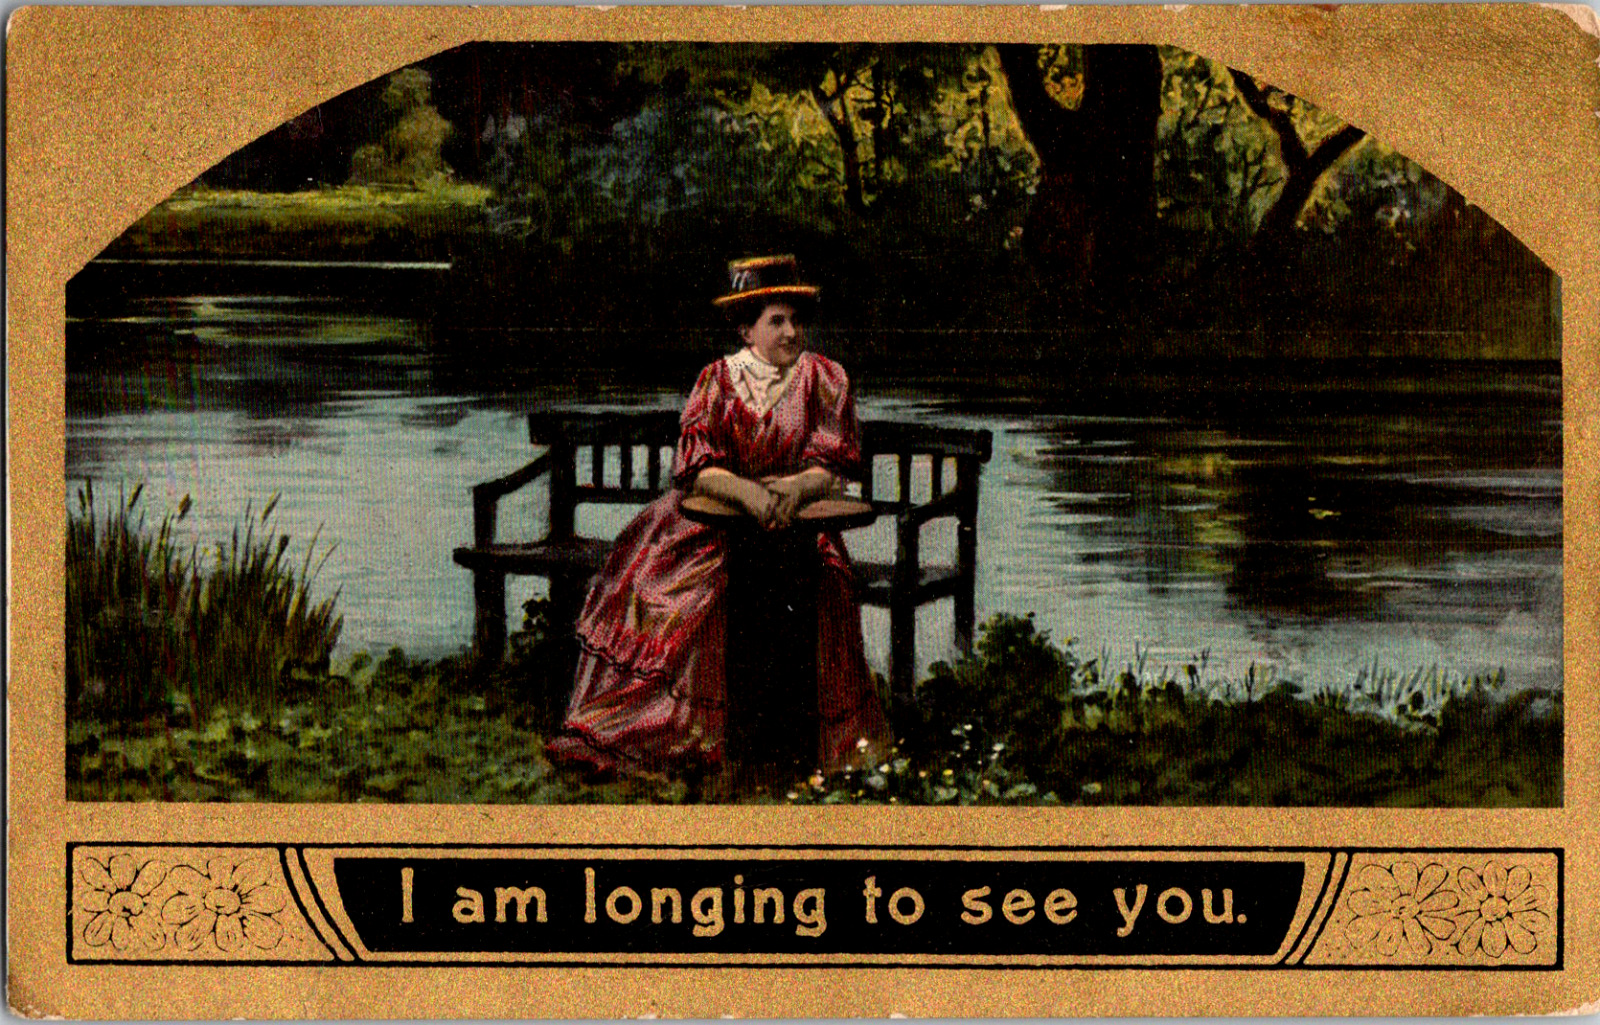 Vintage 1940's Lonely Victorian Dressed Woman Longing Missing You Postcard Park